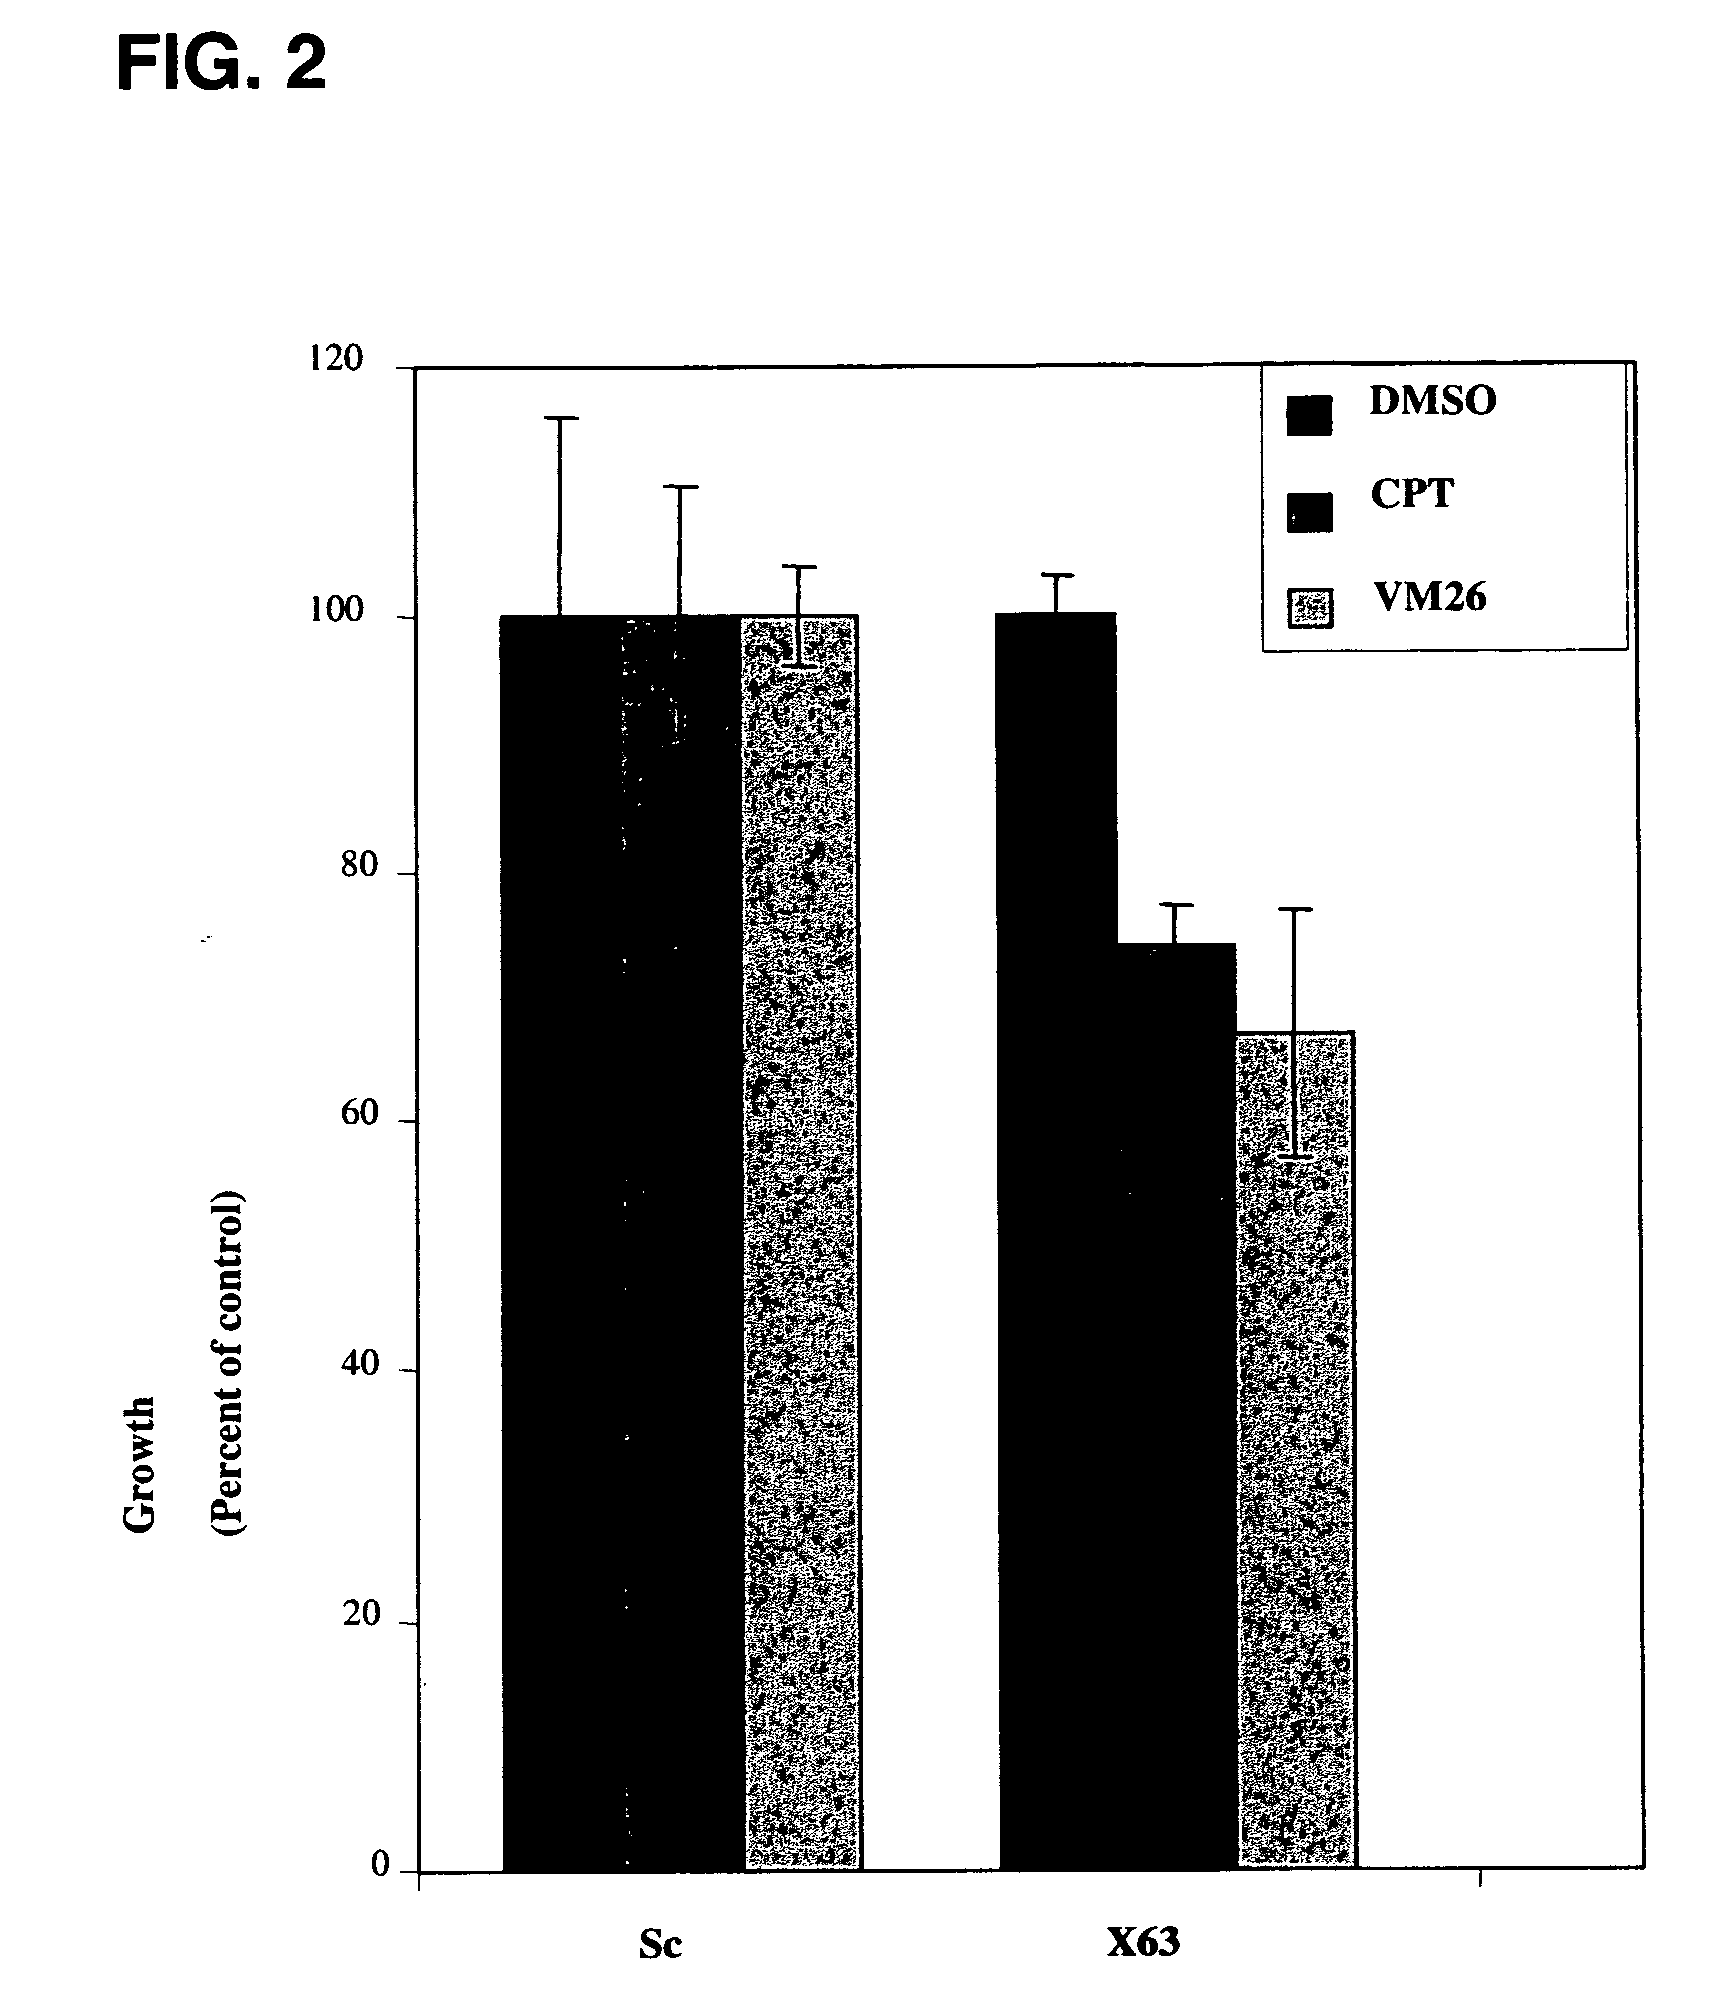 Methods for enhancing the therapeutic efficacy of topoisomerase inhibitors